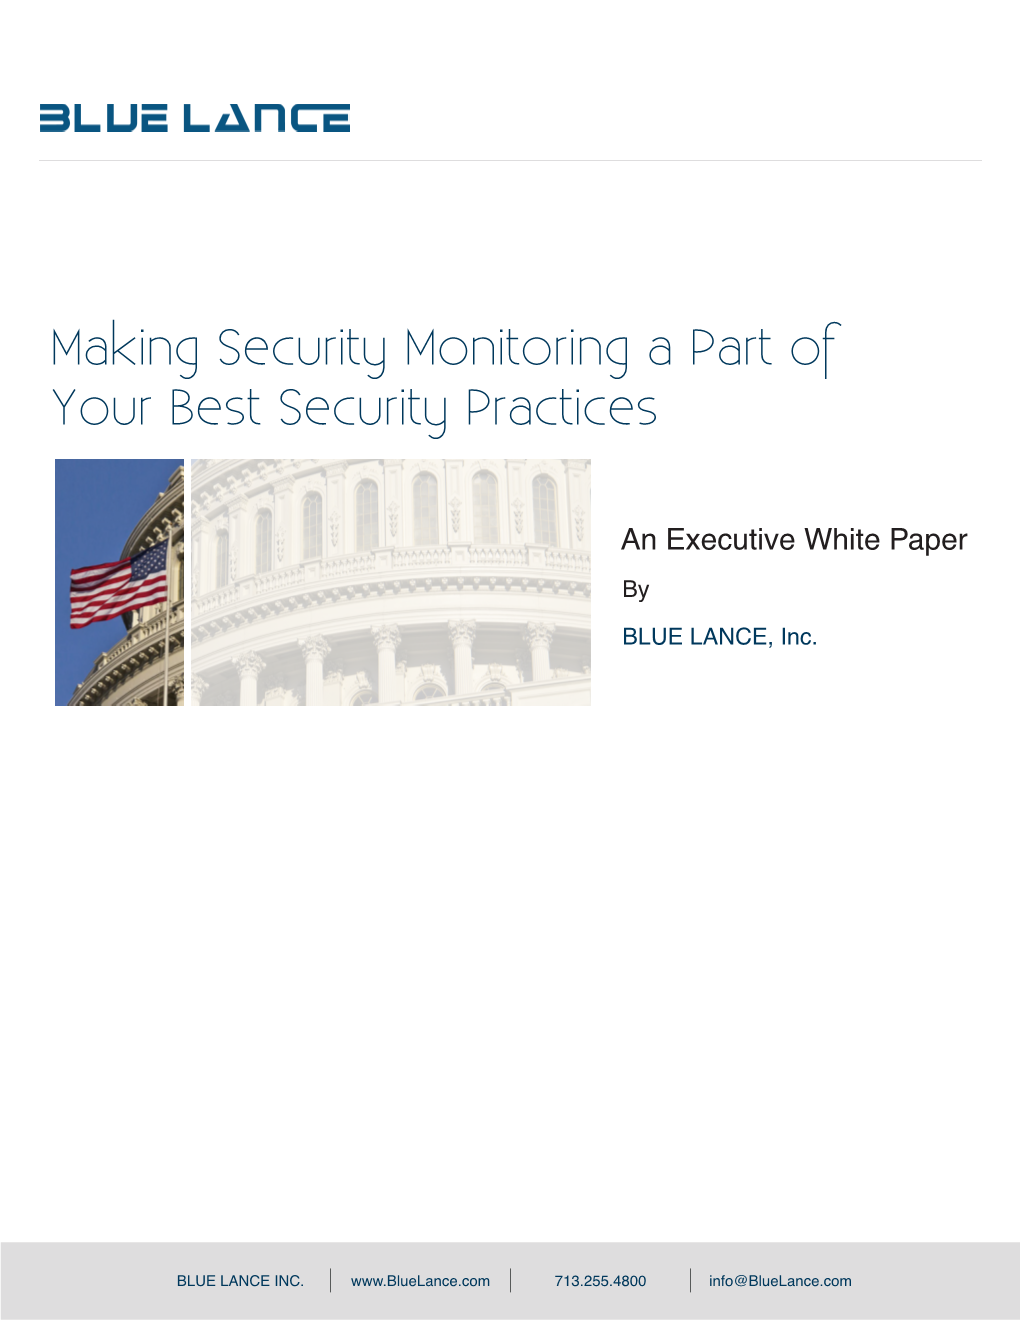 Making Security Monitoring a Part of Your Best Security Practices